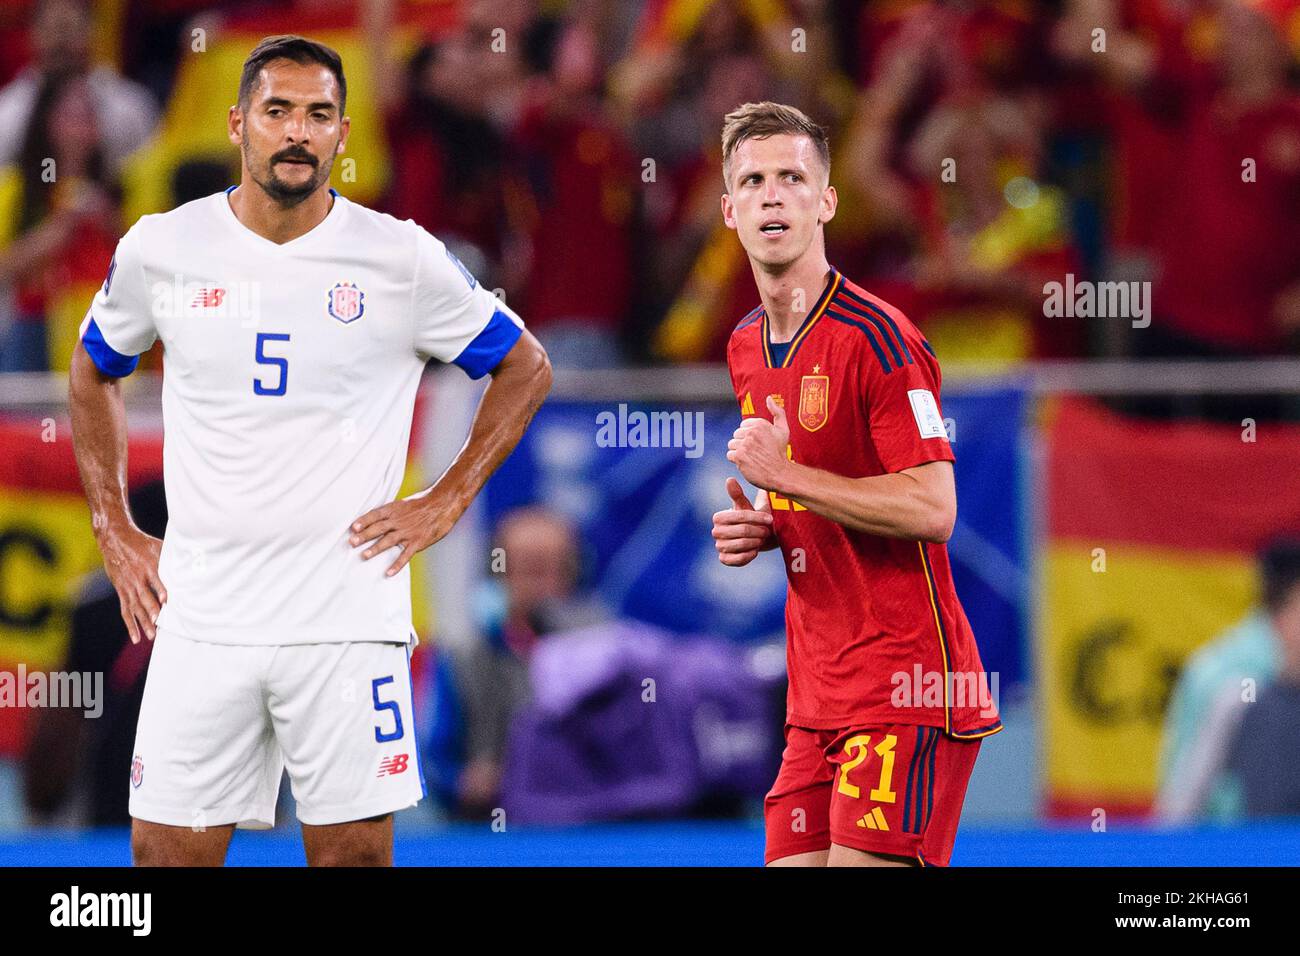 Doha, Qatar. 23rd Nov, 2022. Doha, Qatar, Nov 23rd 2022: Dani Olmo of Spain and Celso Borges of Costa Rica during a match between Spain vs Costa Rica, valid for the group stage of the World Cup, held at Al Thumama Stadium in Doha, Qatar. (Marcio Machado/SPP) Credit: SPP Sport Press Photo. /Alamy Live News Stock Photo